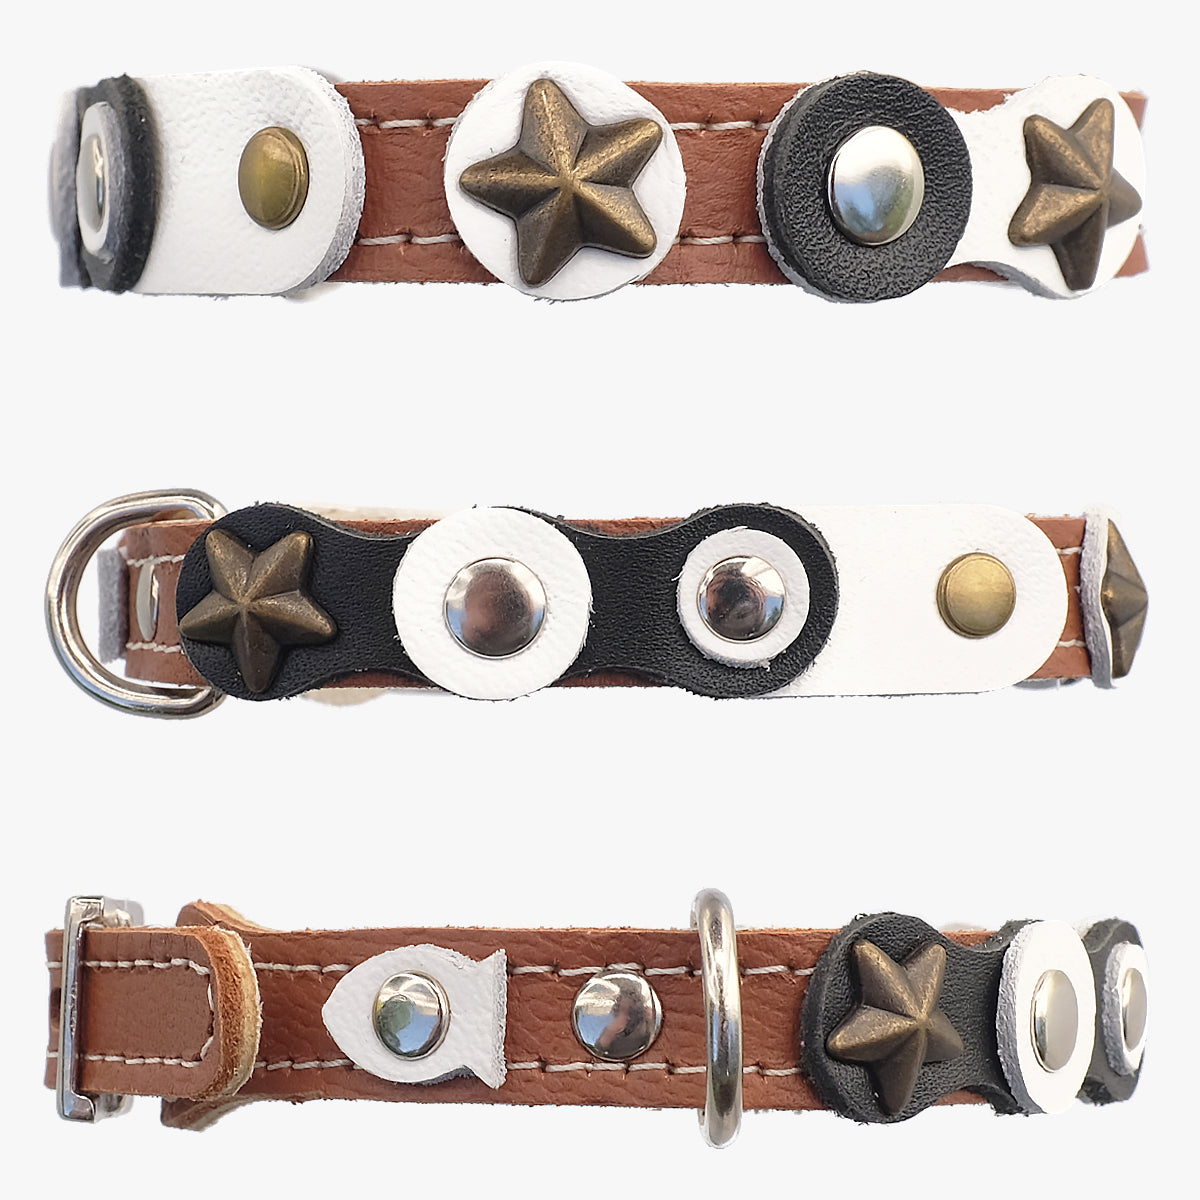 Superpipapo Luxury Leather Cat Collar, With Stars, Studs, & Black & White Patches | at Made Moggie